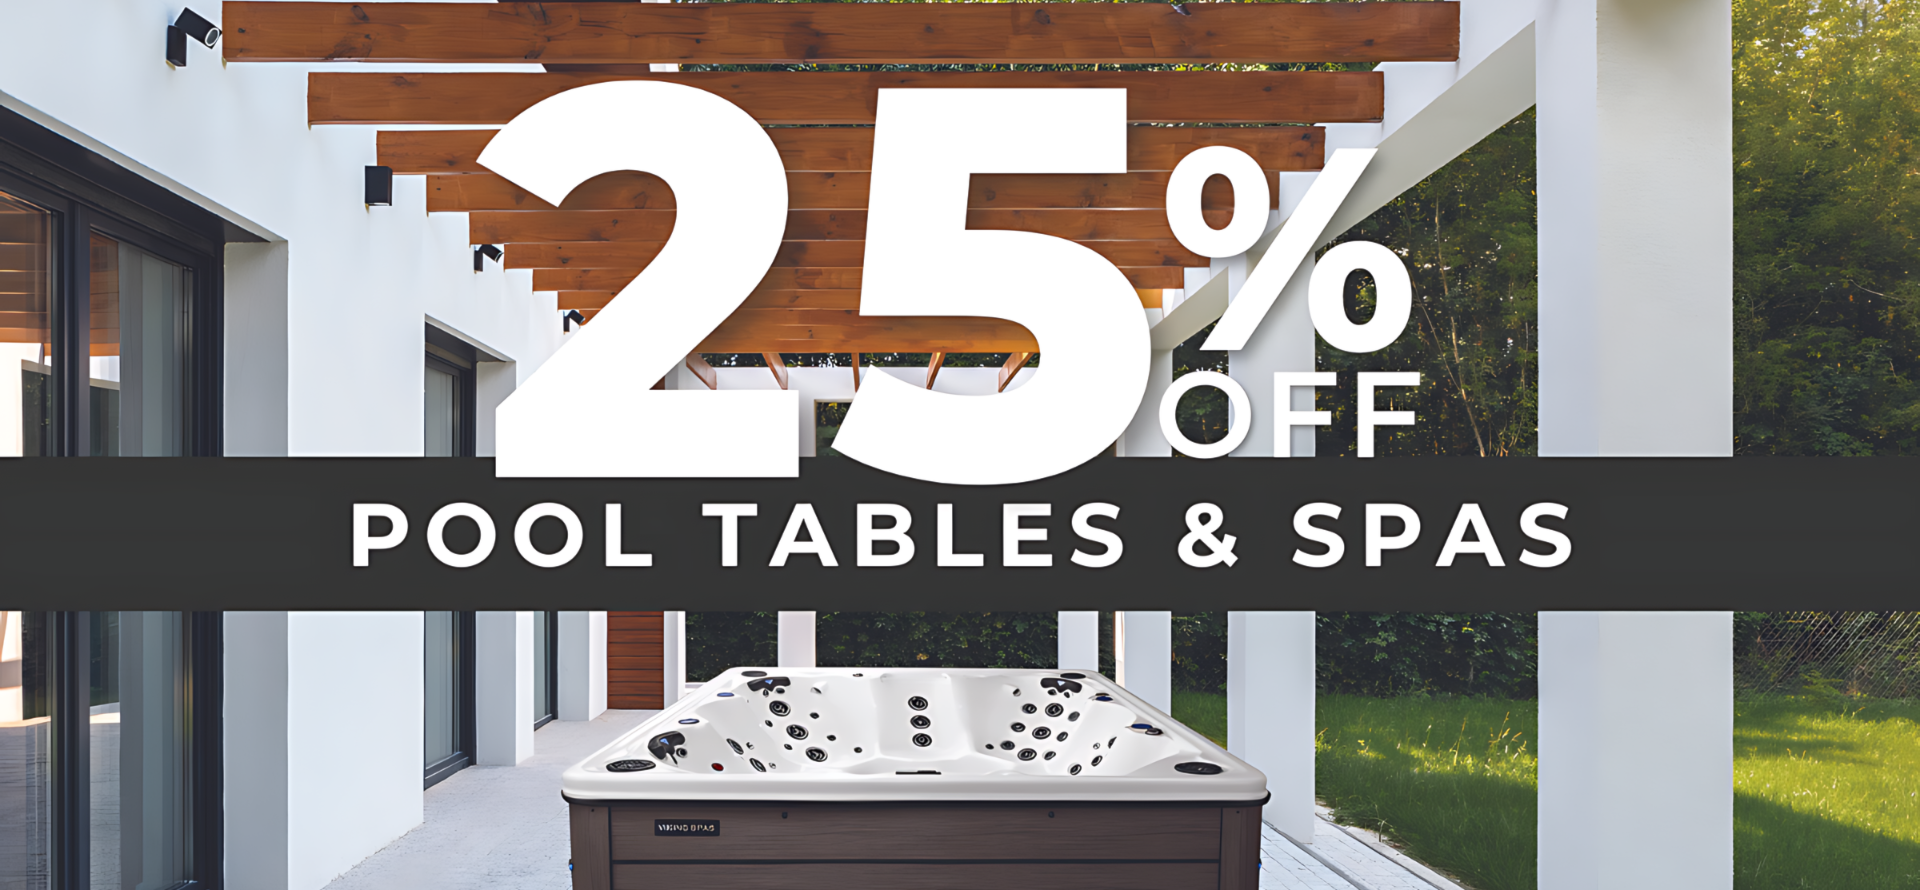 25% OFF Pool tables and spas